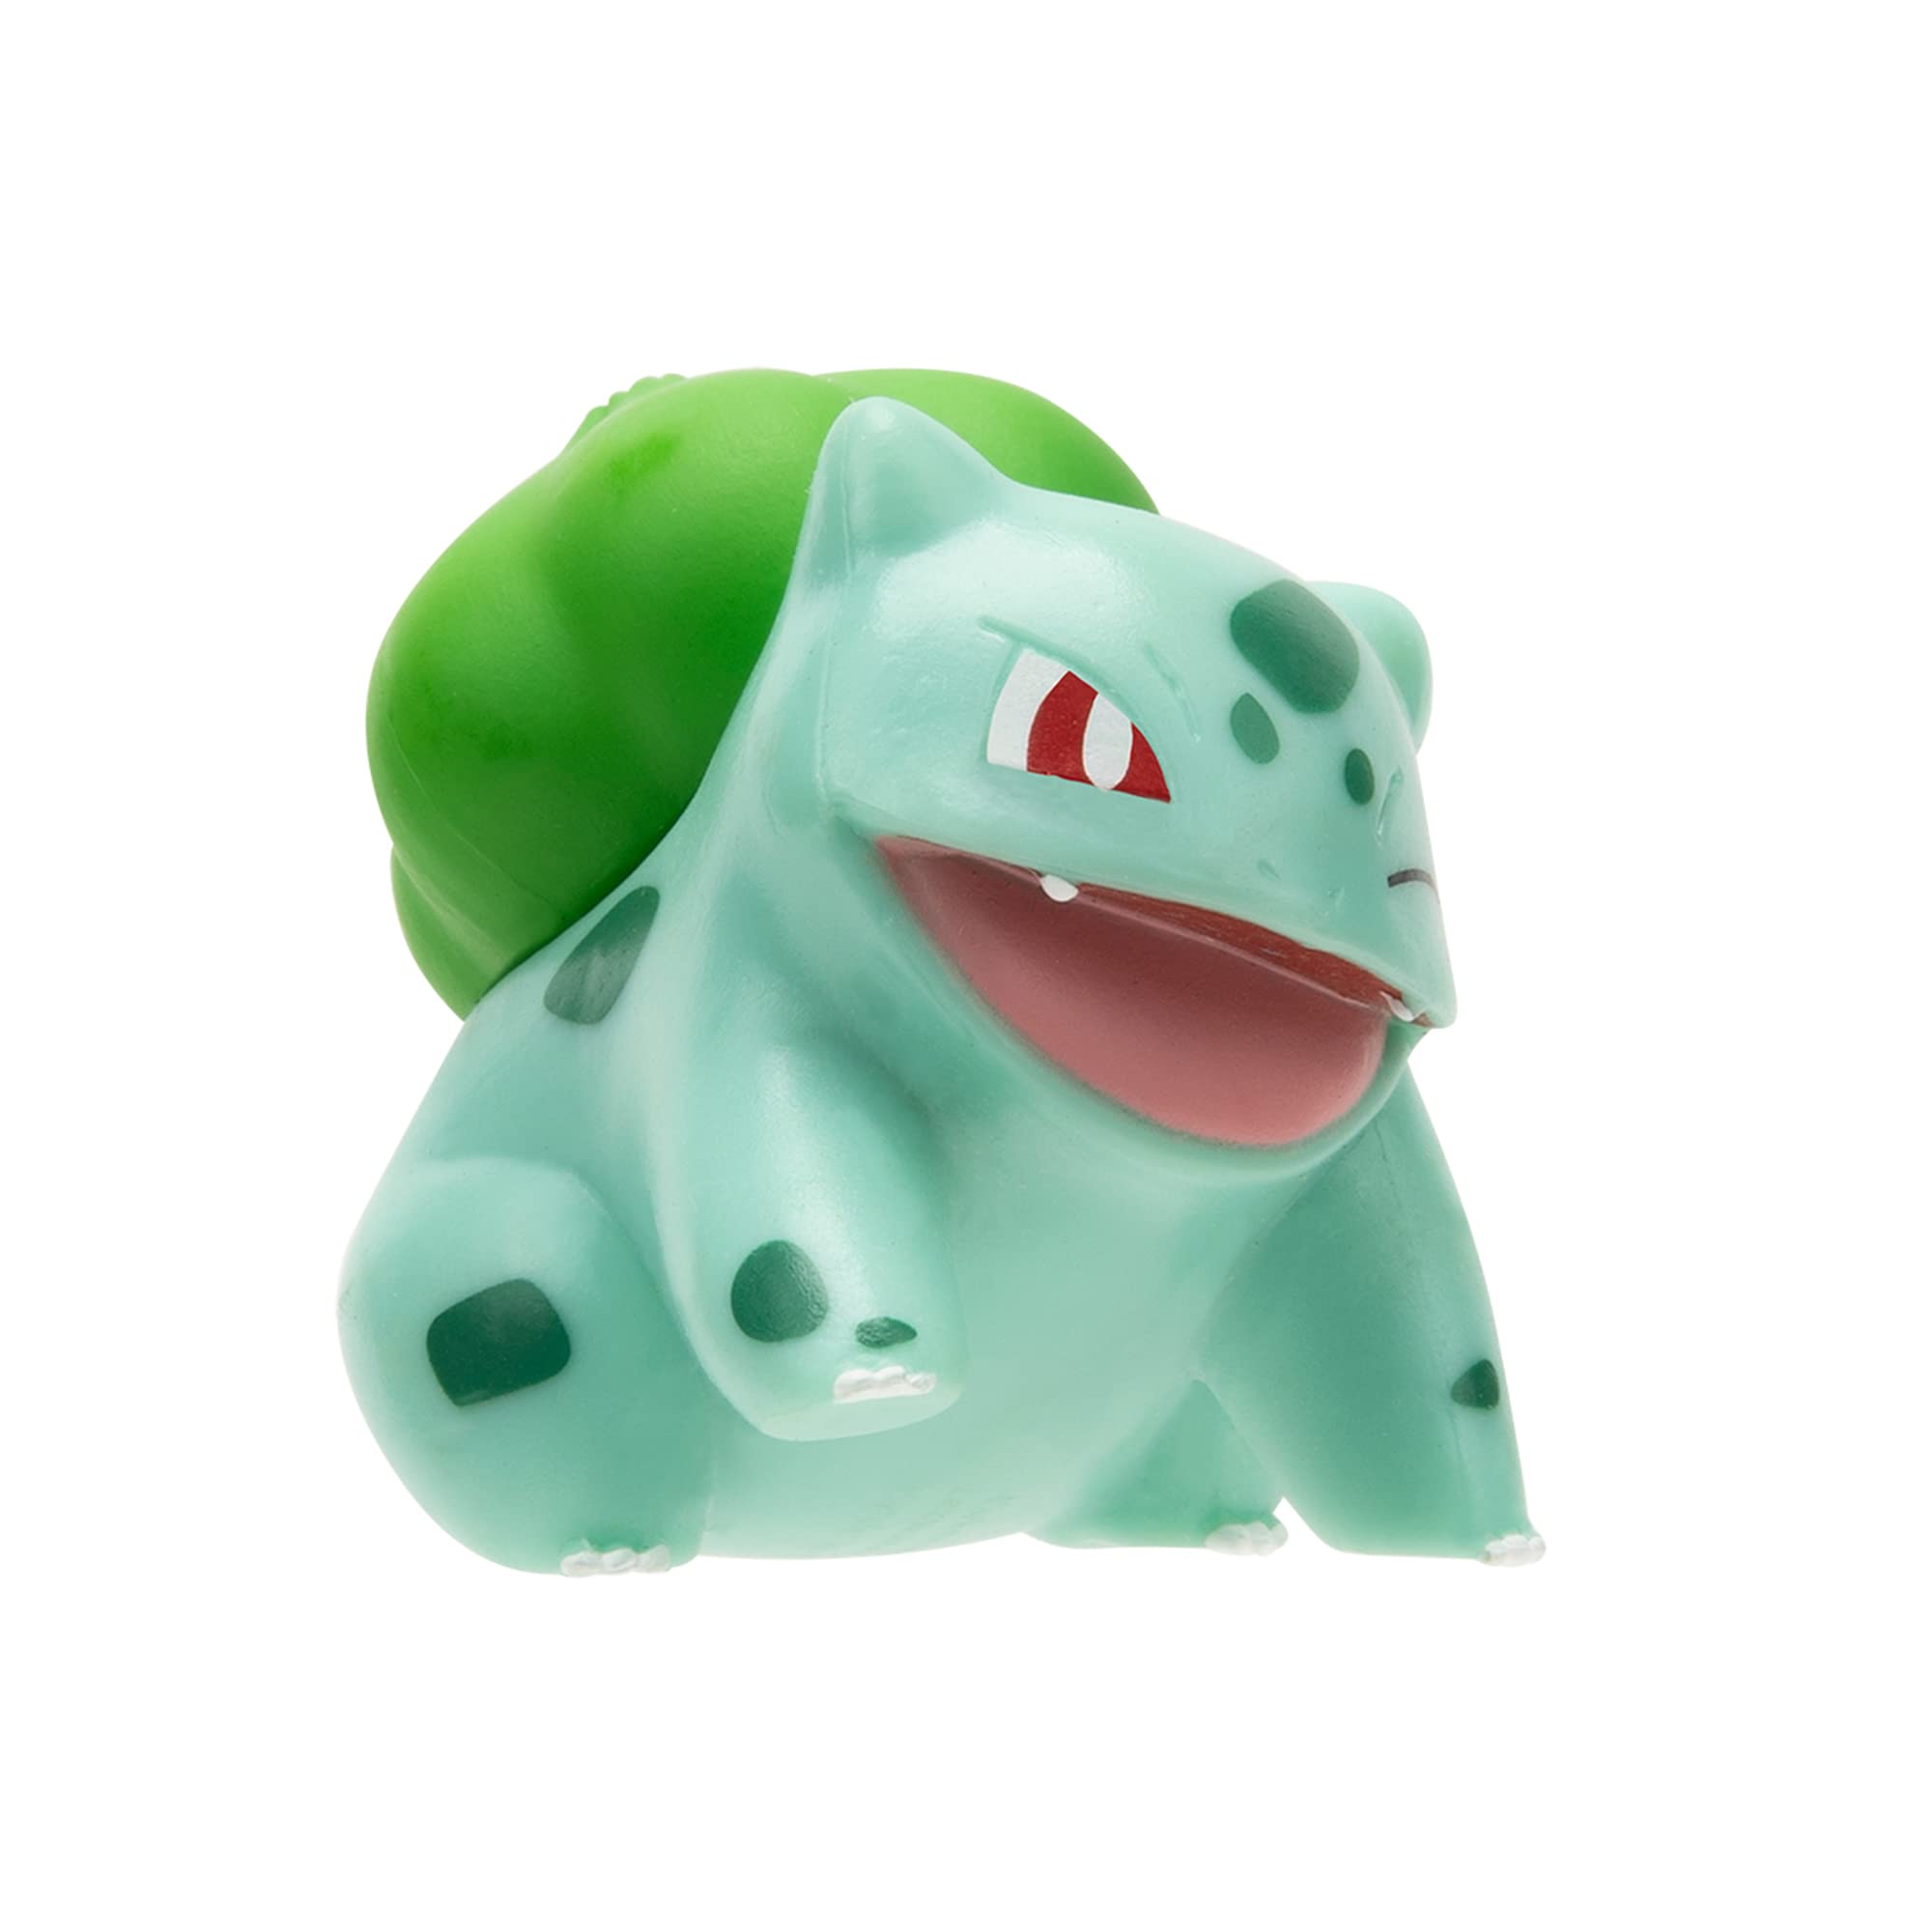 Pokemon Select Forest Environment - Multi-Level Display Set with 2-Inch Bulbasaur and Applin Battle Figures